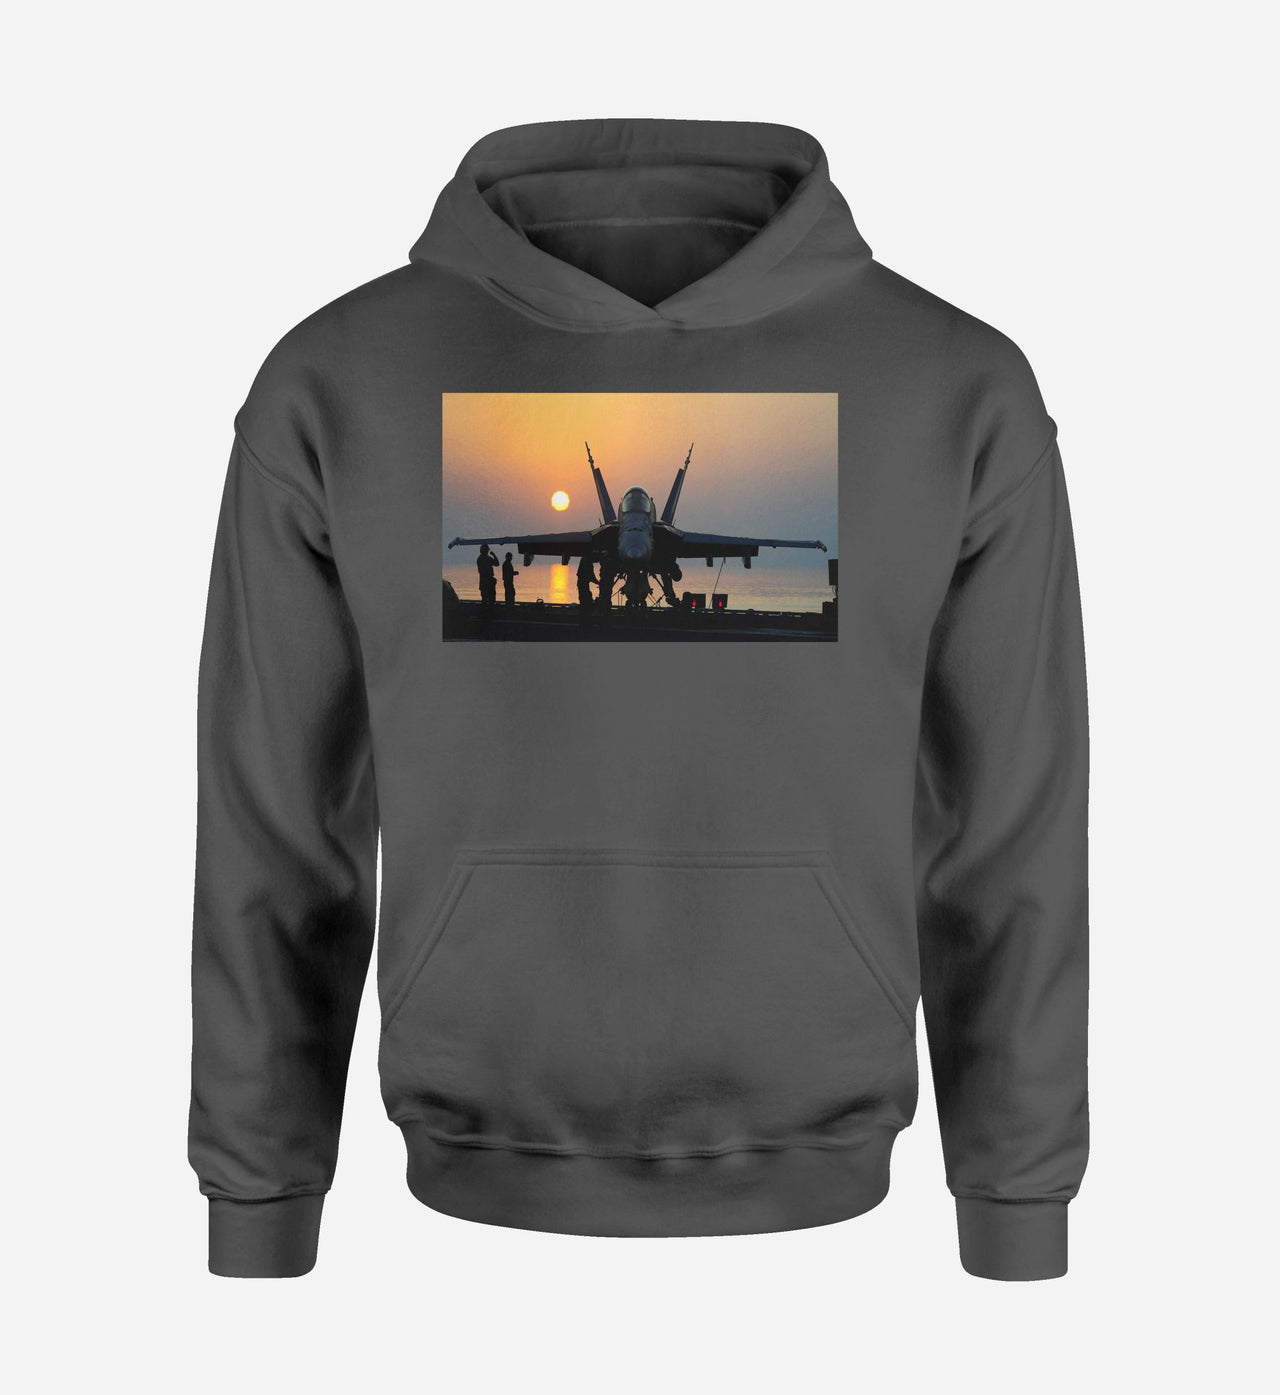 Military Jet During Sunset Designed Hoodies